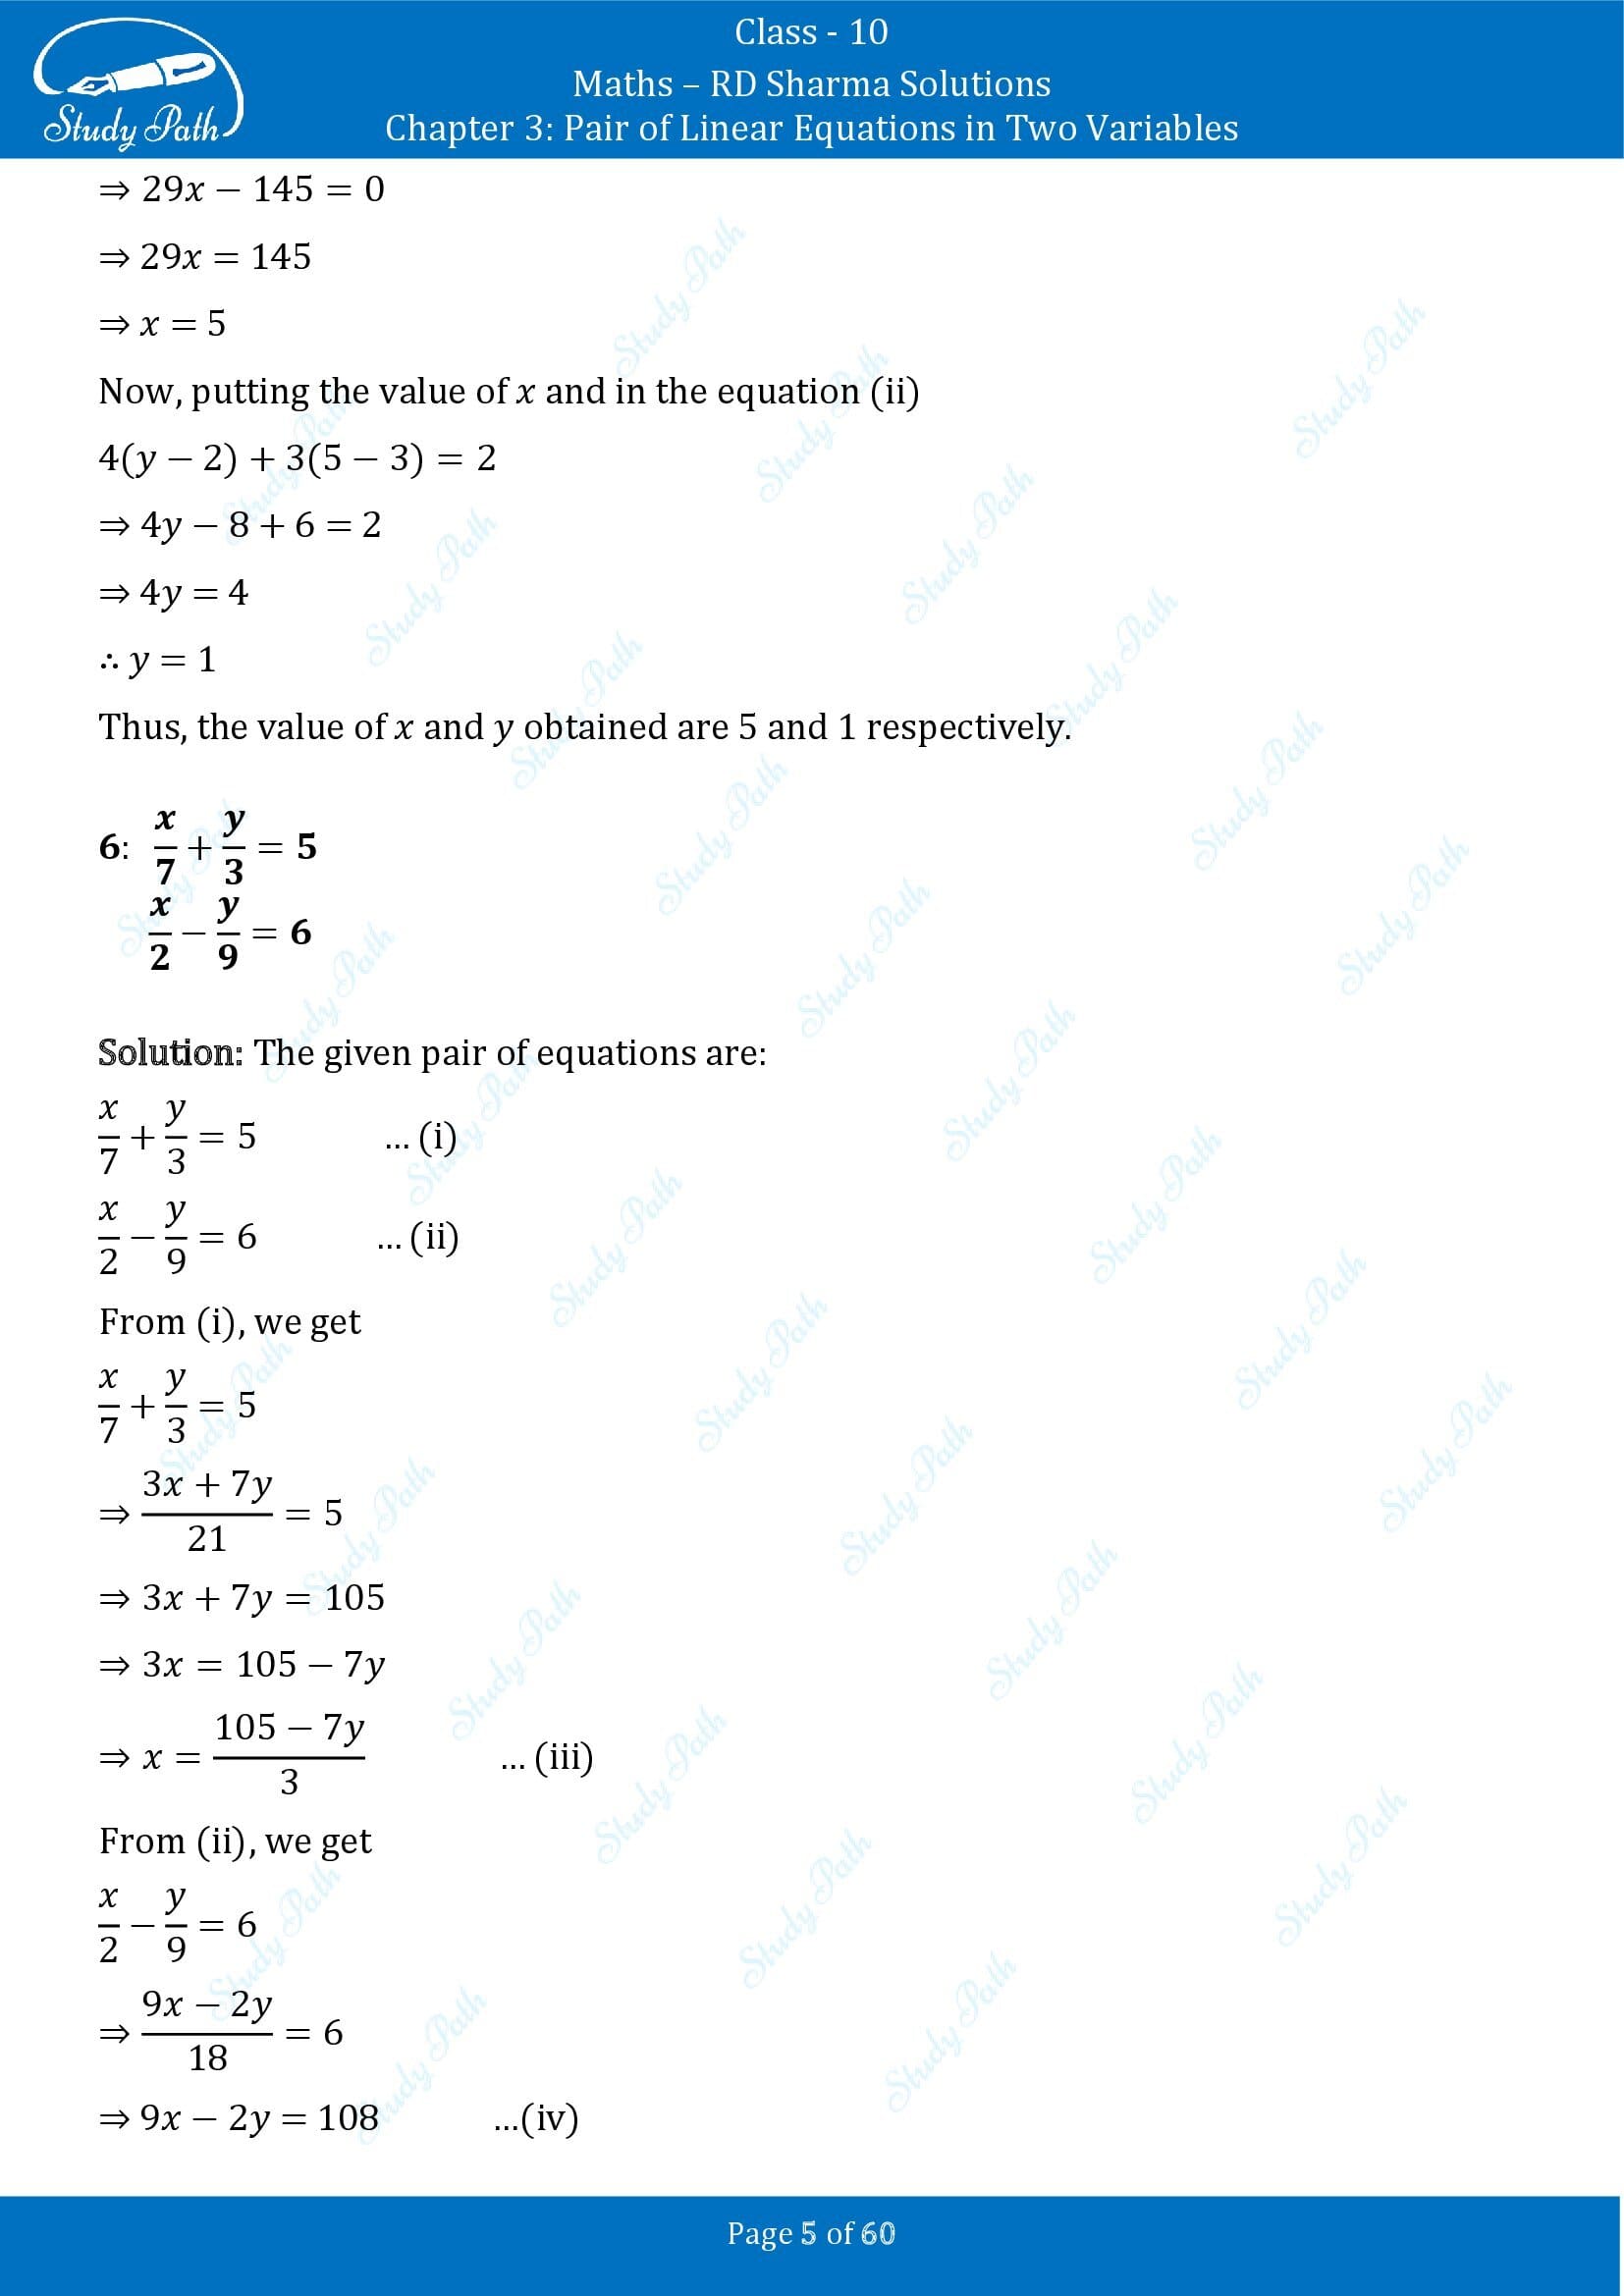 RD Sharma Solutions Class 10 Chapter 3 Pair of Linear Equations in Two Variables Exercise 3.3 00005